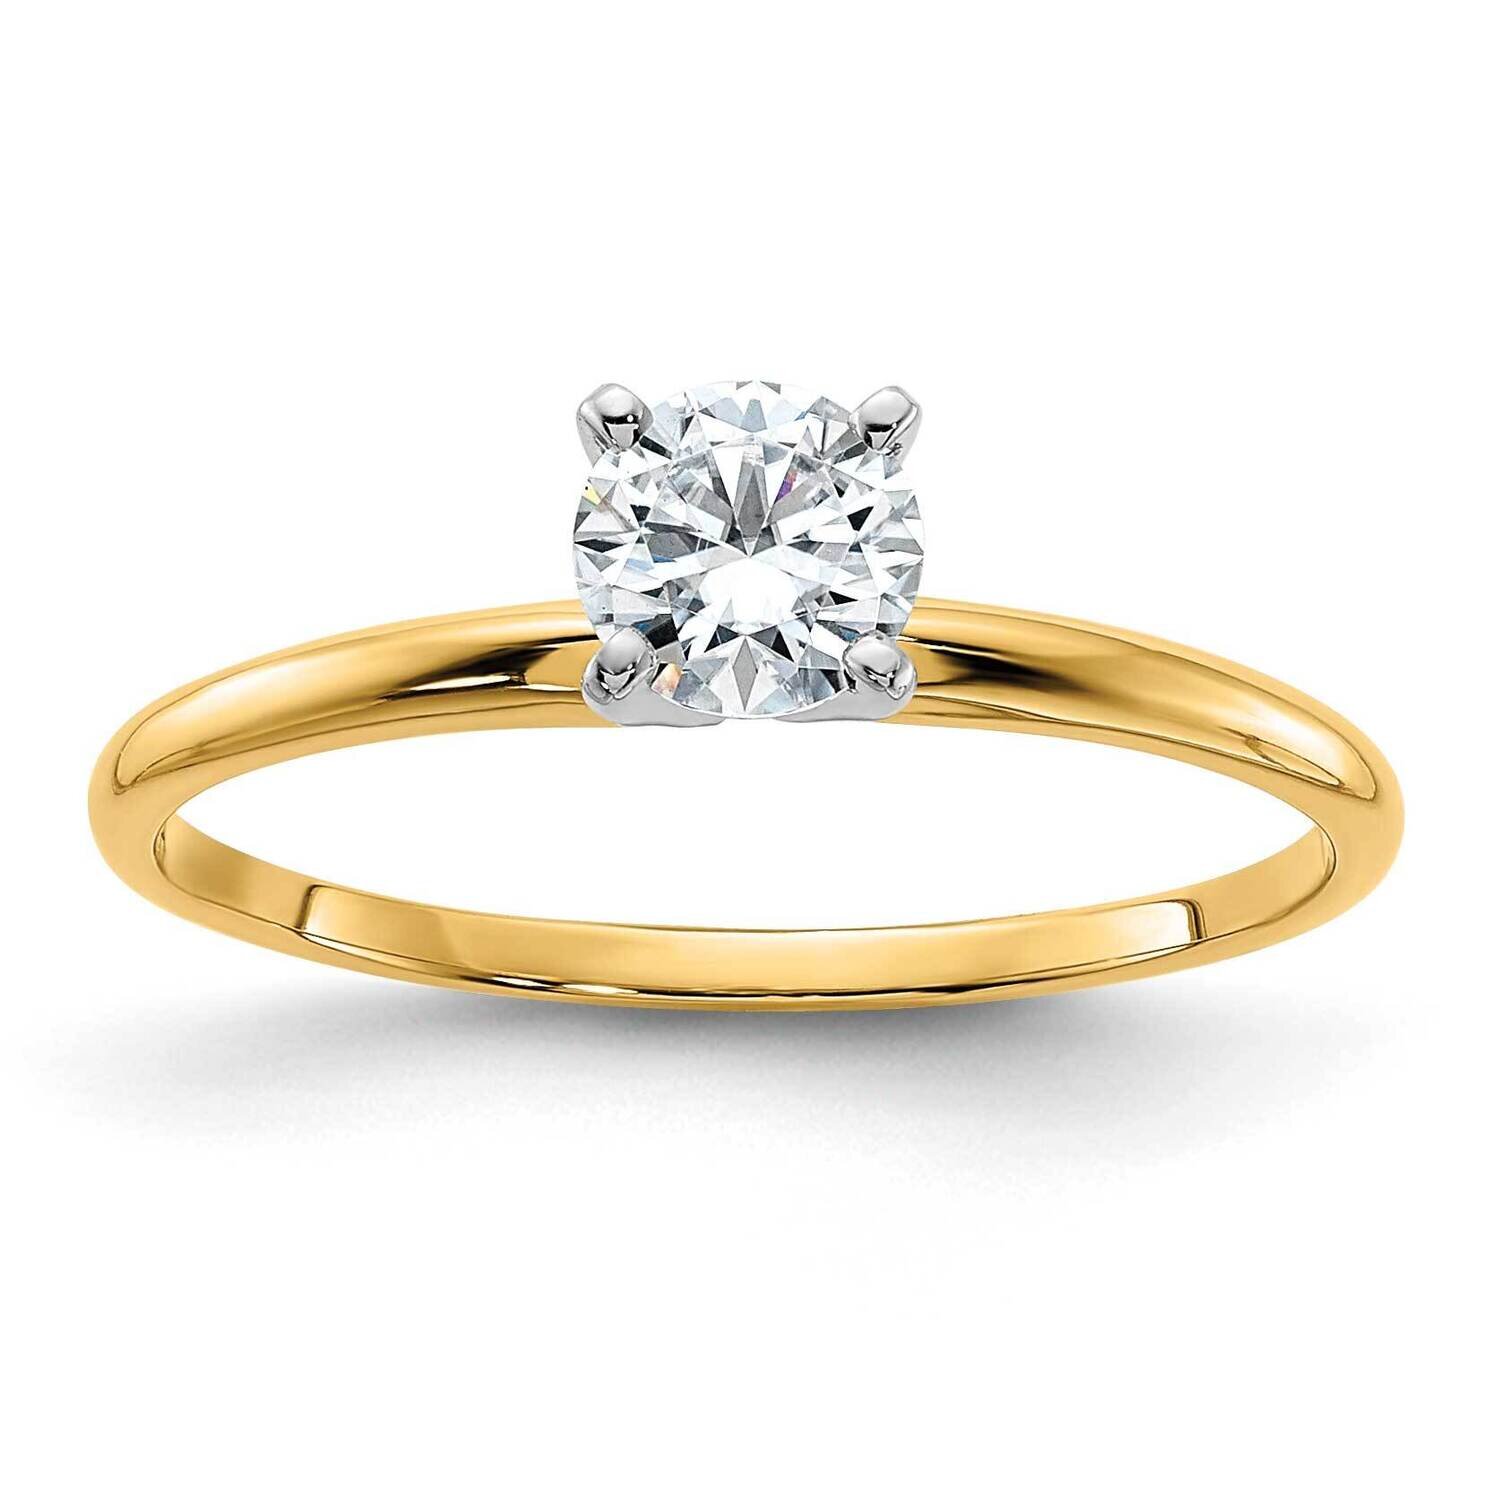 1/2ct. D E F Pure Light Round Moissanite Solitaire Ring 14k Gold YGSH13-9MP